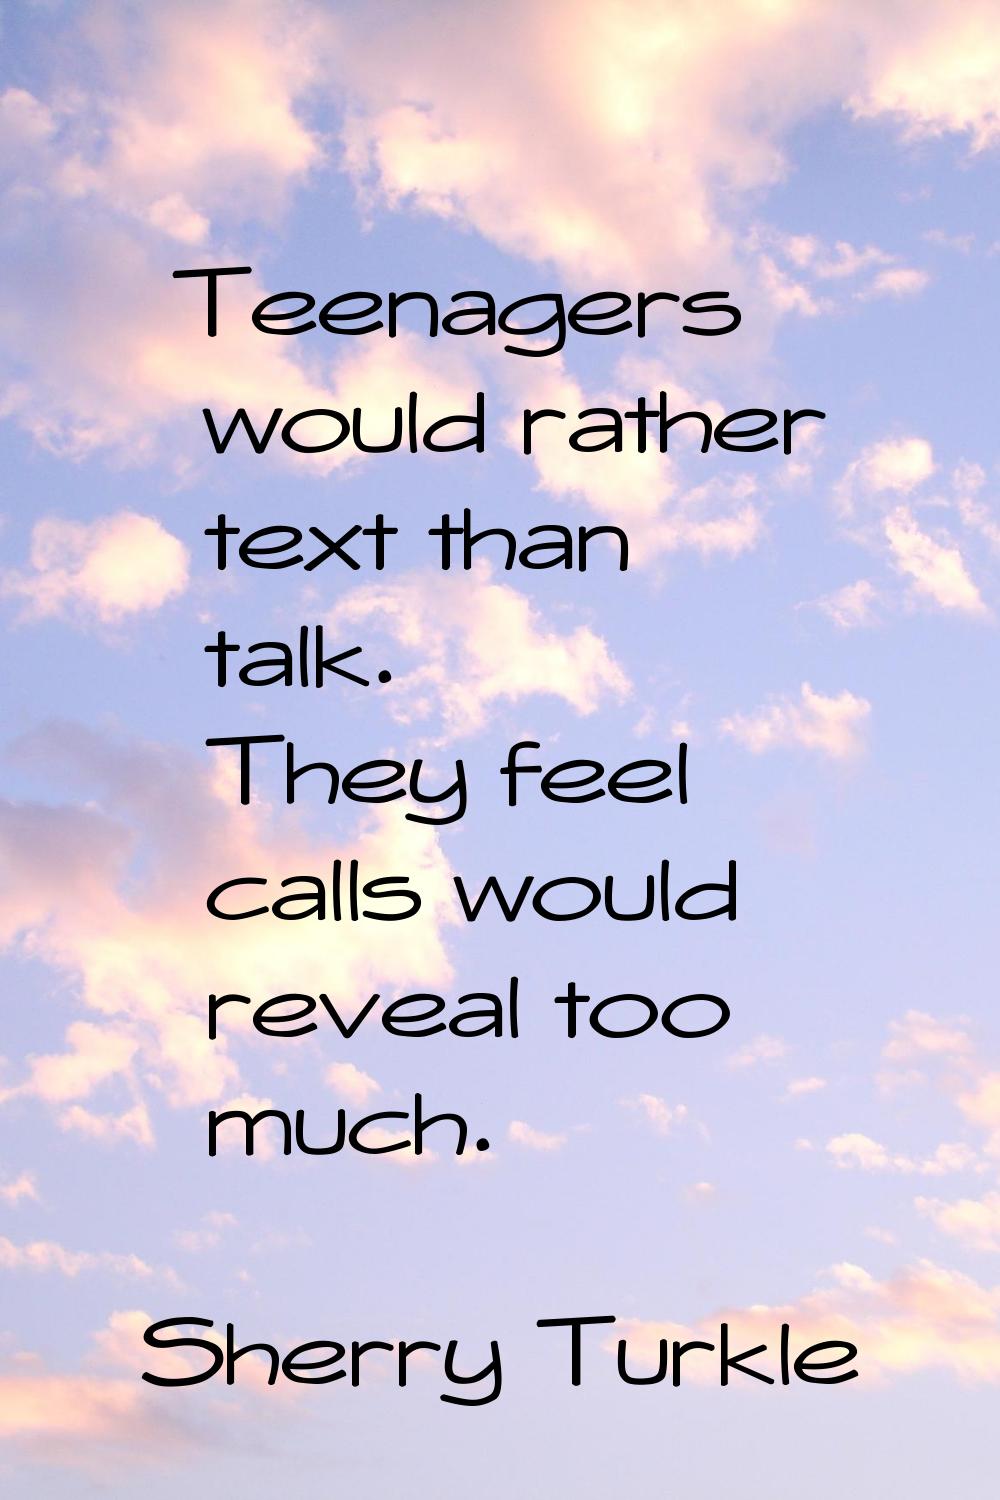 Teenagers would rather text than talk. They feel calls would reveal too much.